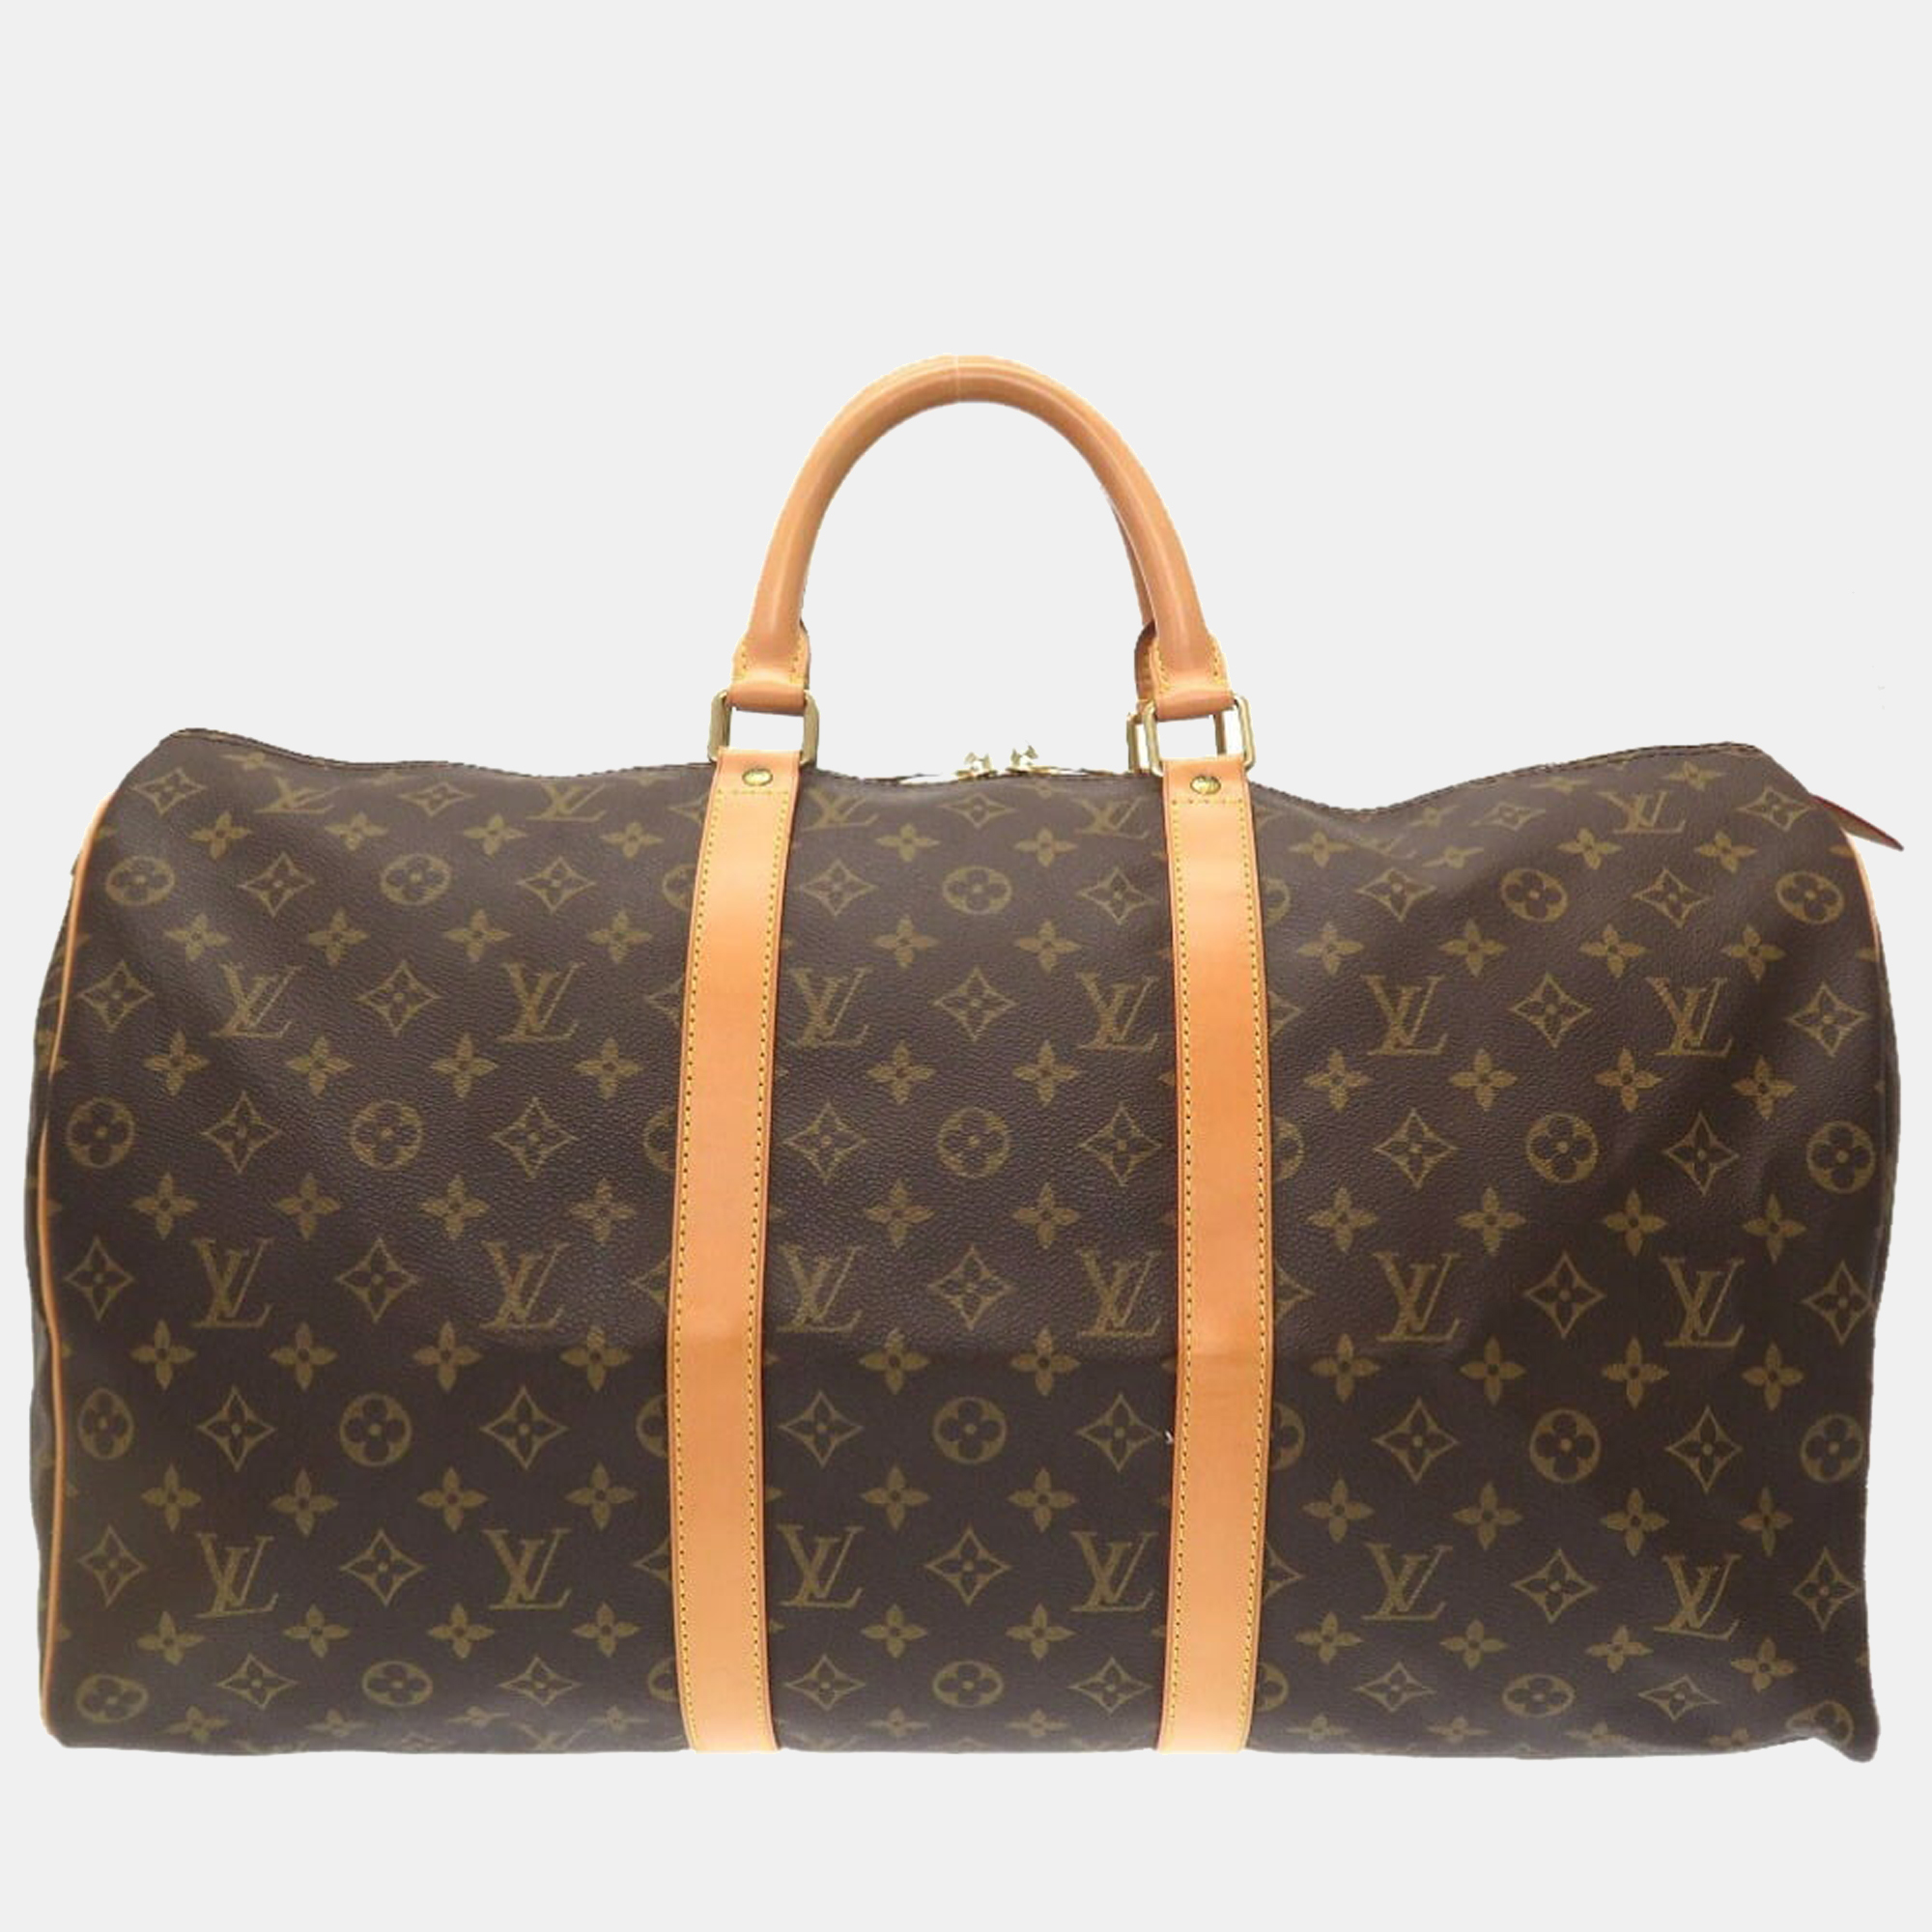 Perfect for conveniently housing your essentials in one place this Louis Vuitton accessory is a worthy investment. It has notable details and offers a look of luxury.